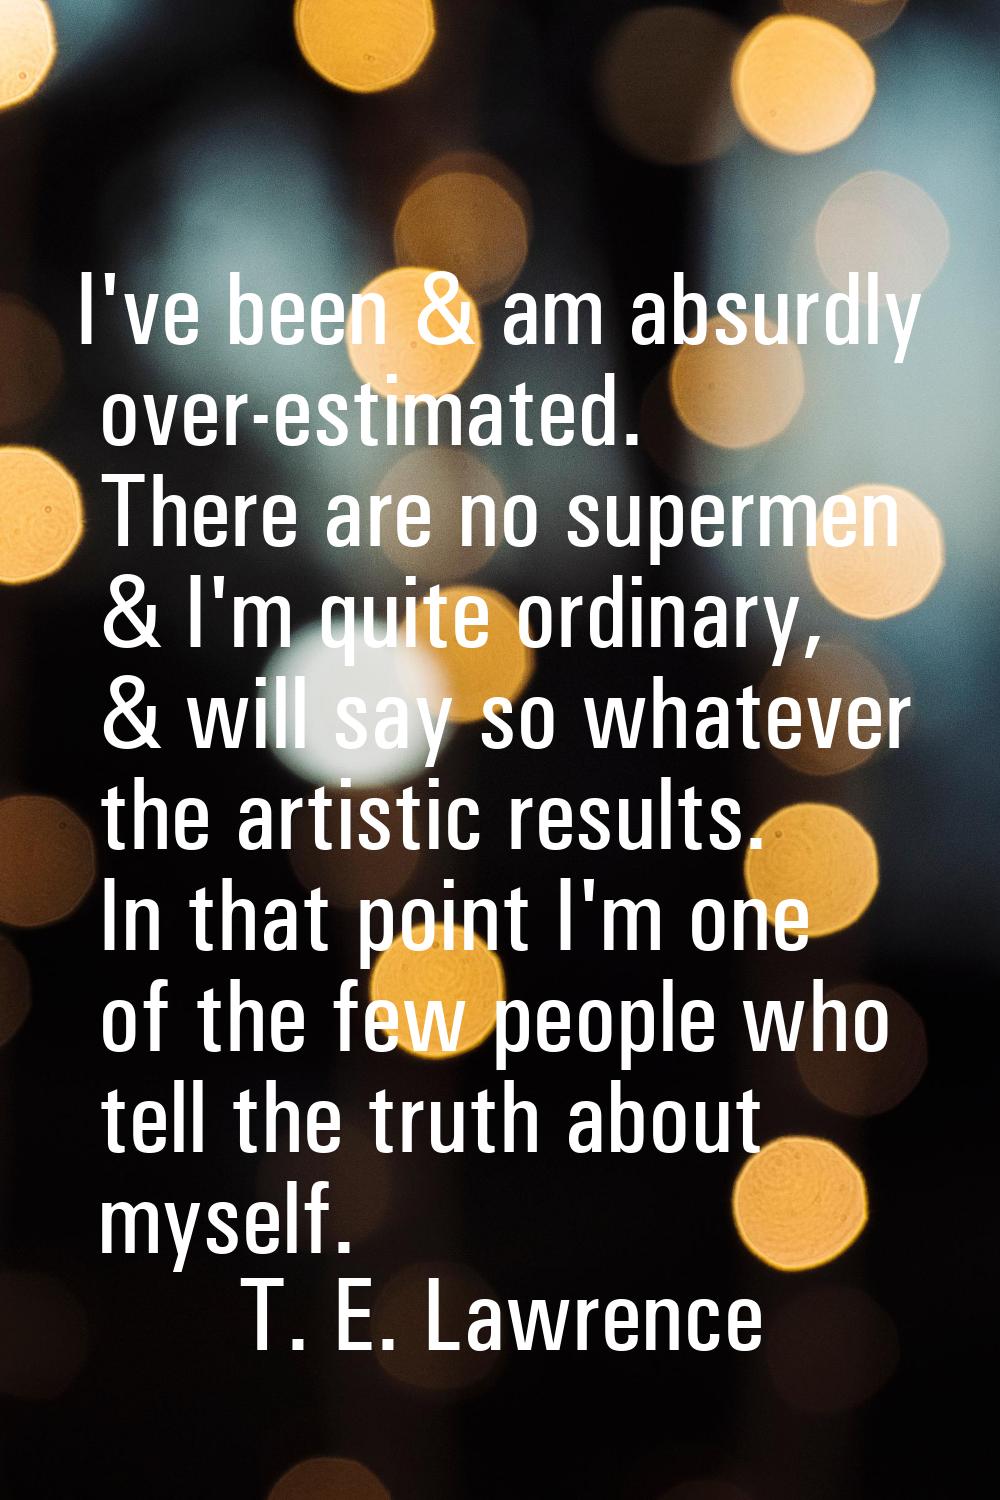 I've been & am absurdly over-estimated. There are no supermen & I'm quite ordinary, & will say so w